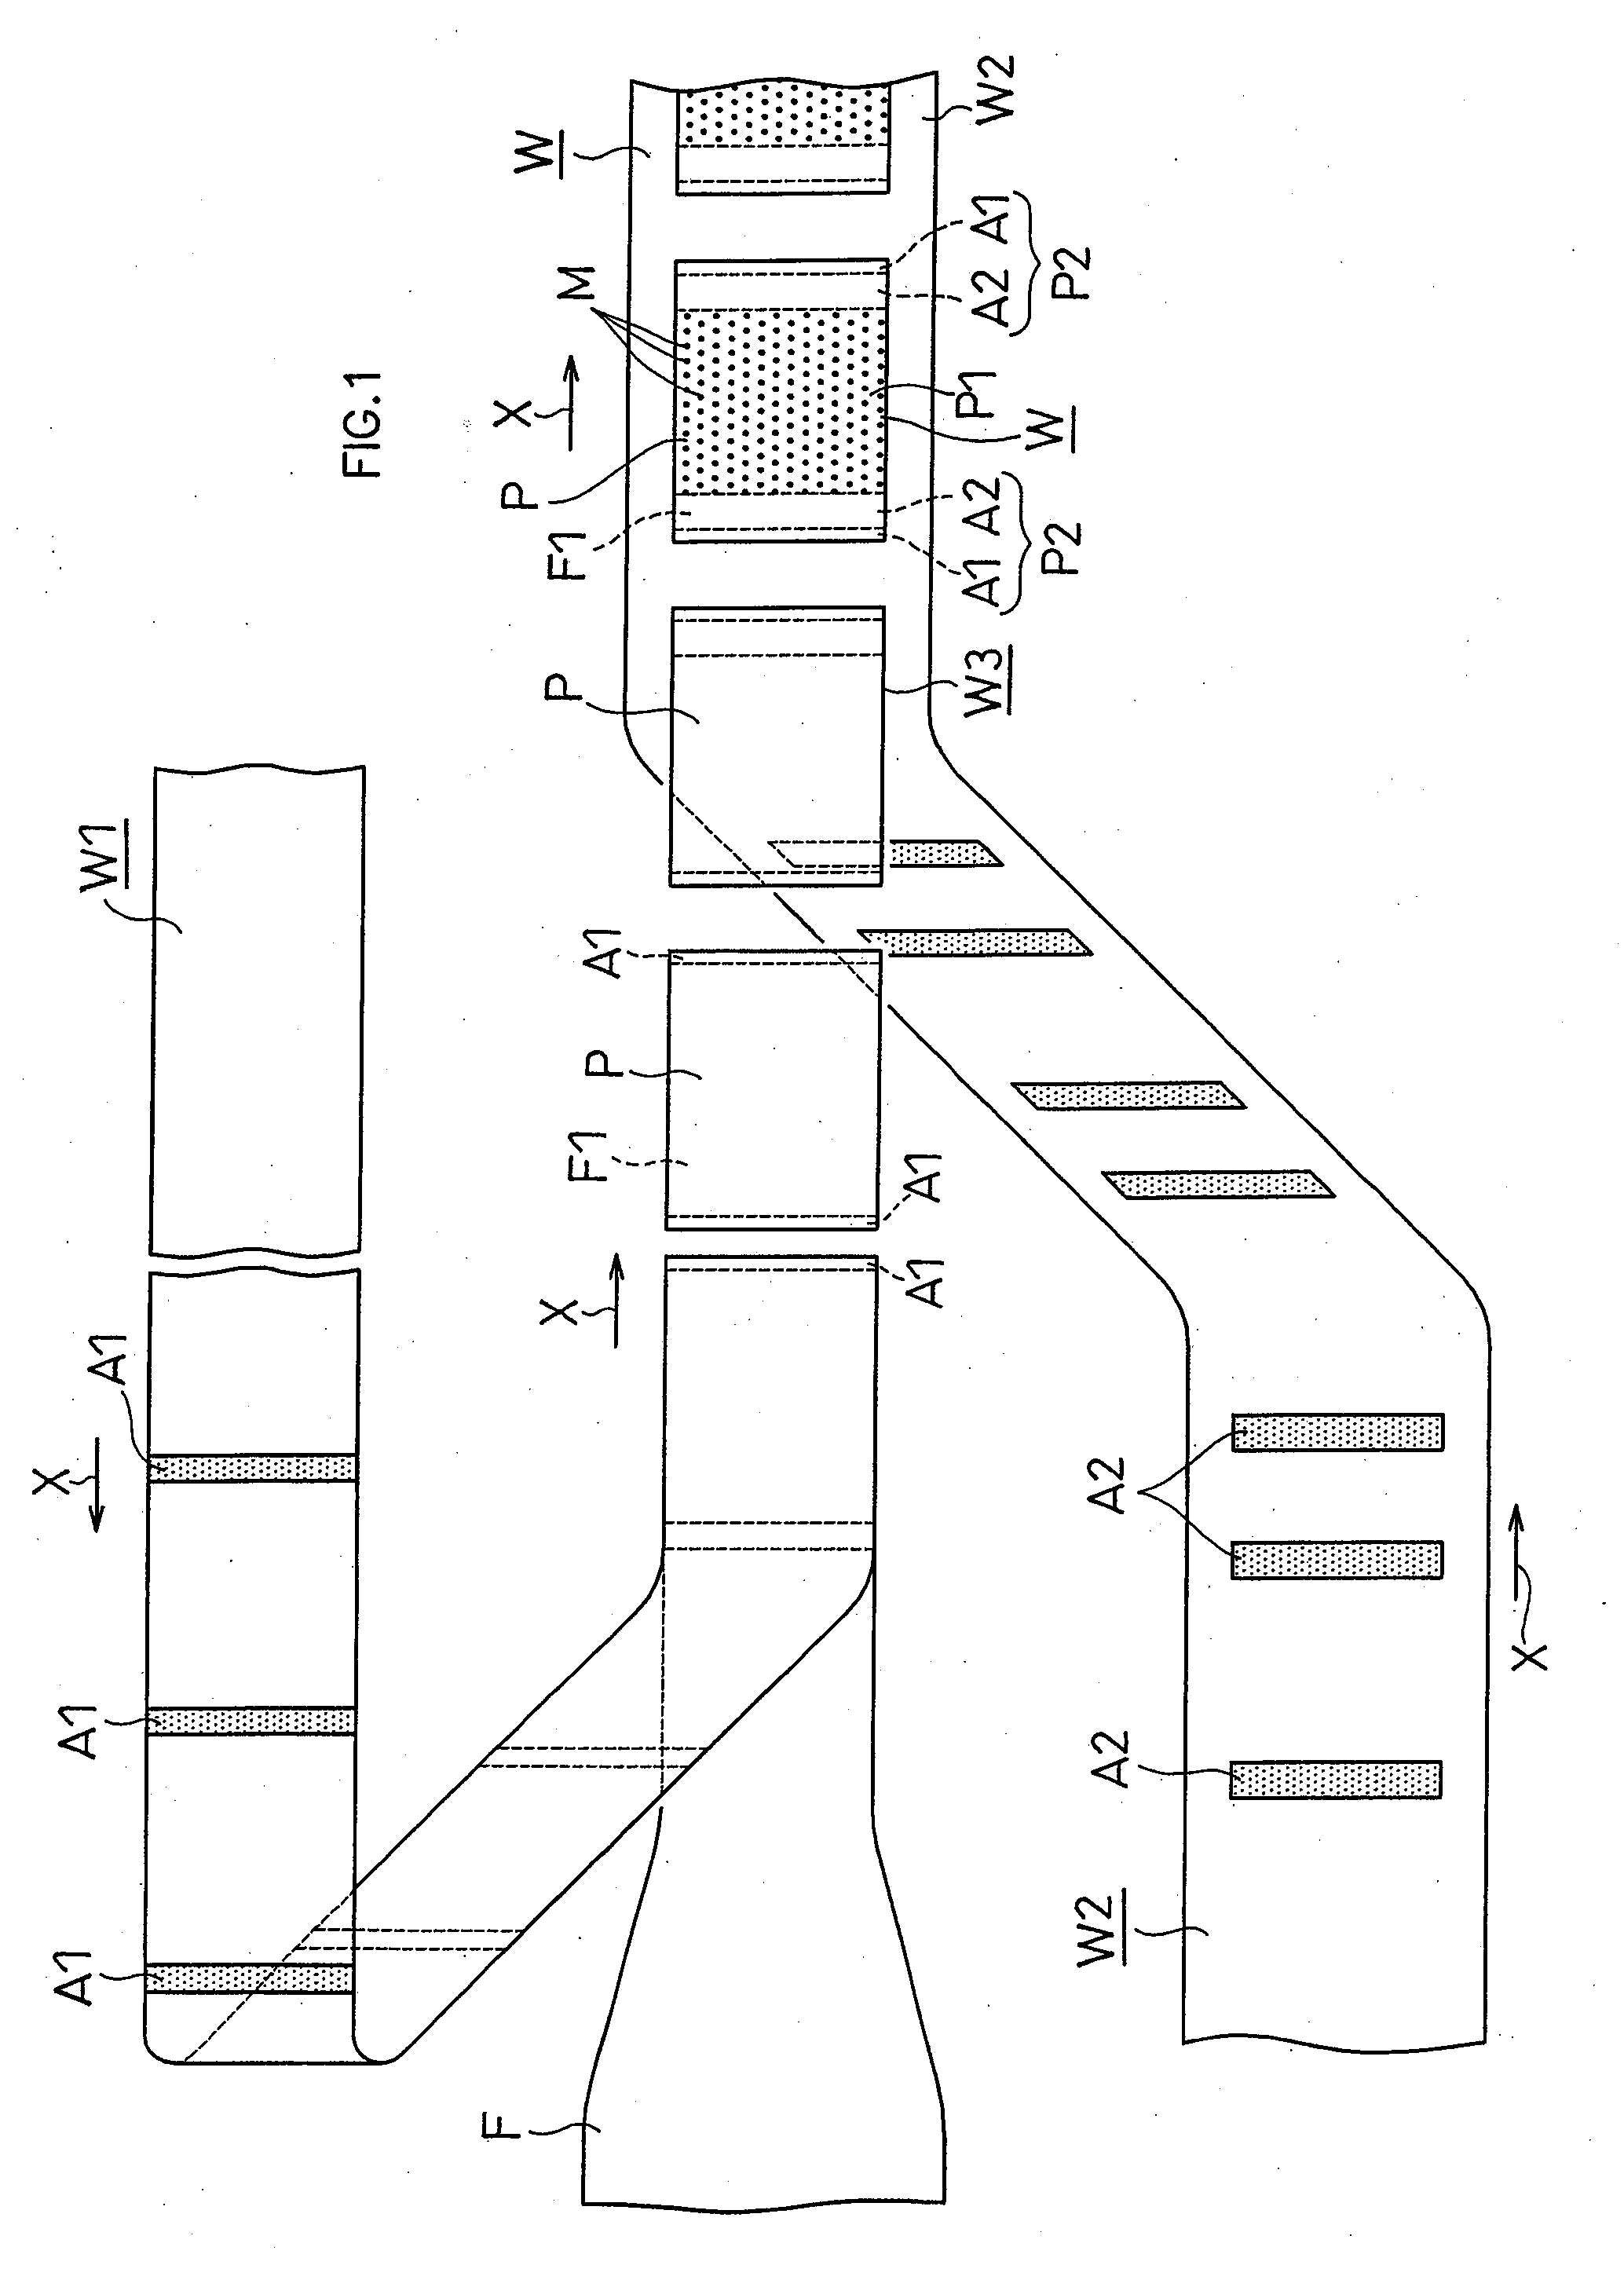 Method for producing disposable worn article